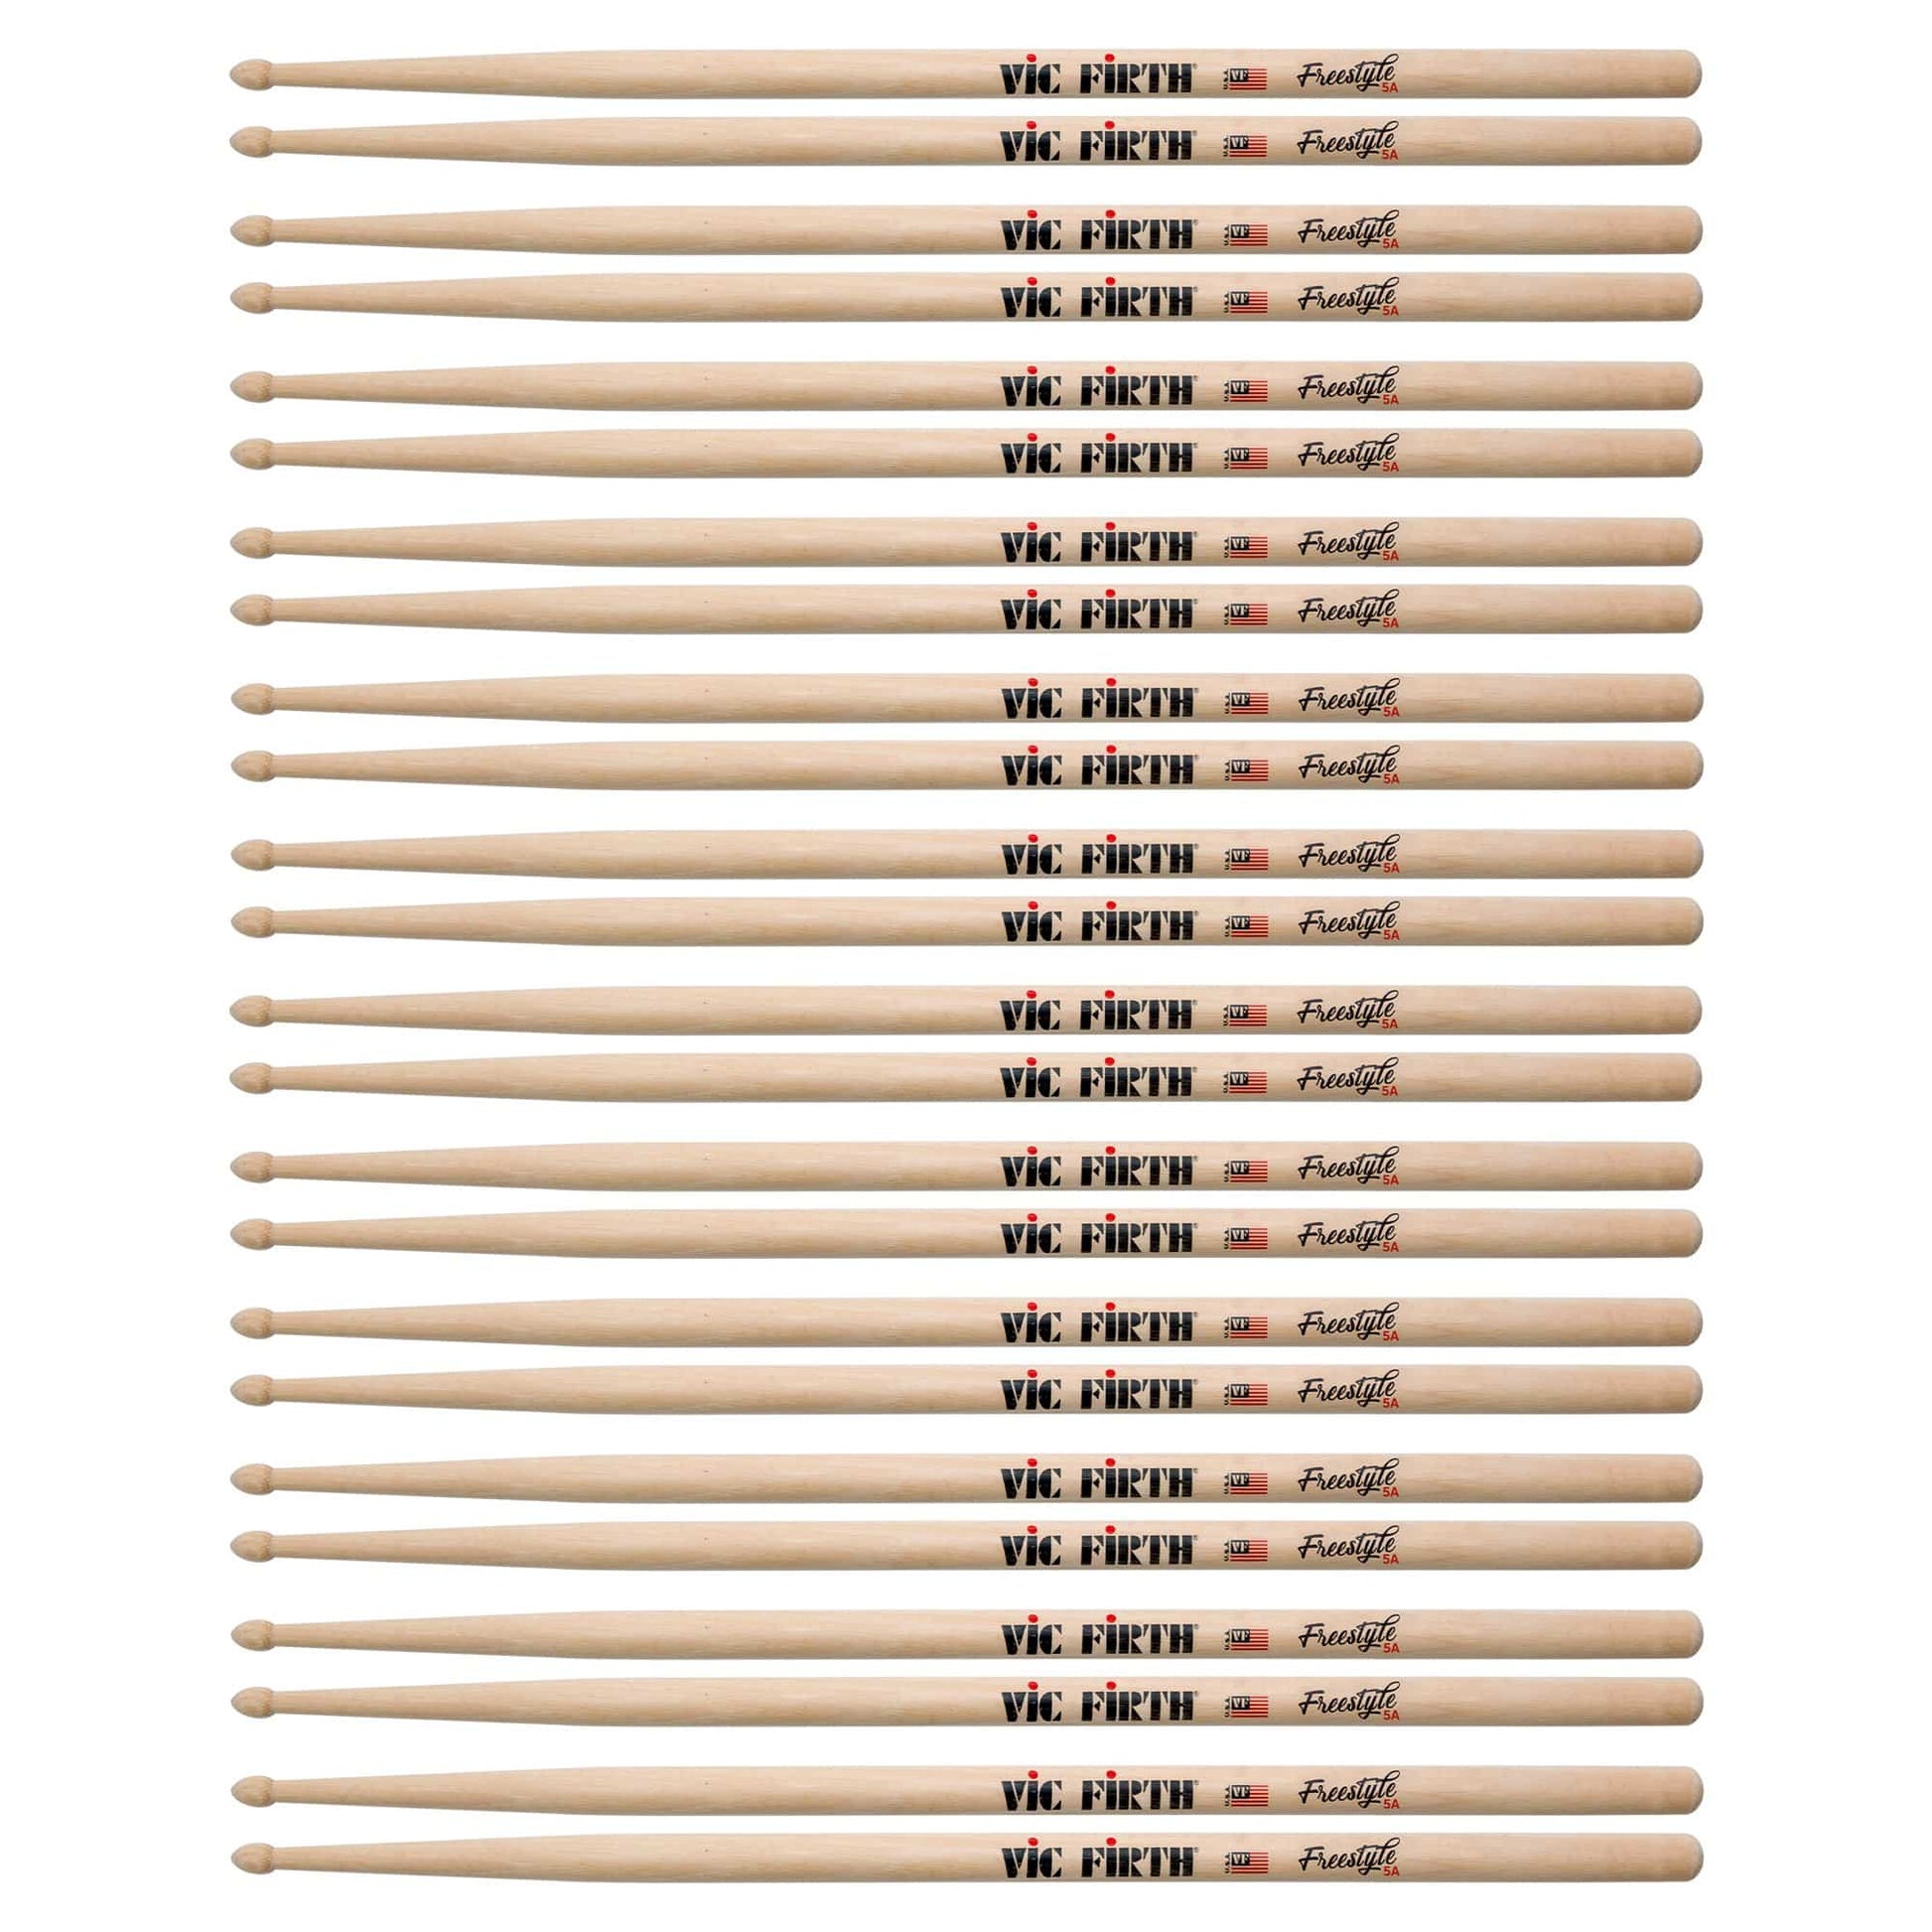 Vic Firth American Concept Freestyle 5A Wood Tip Drum Sticks (12 Pair Bundle) Drums and Percussion / Parts and Accessories / Drum Sticks and Mallets